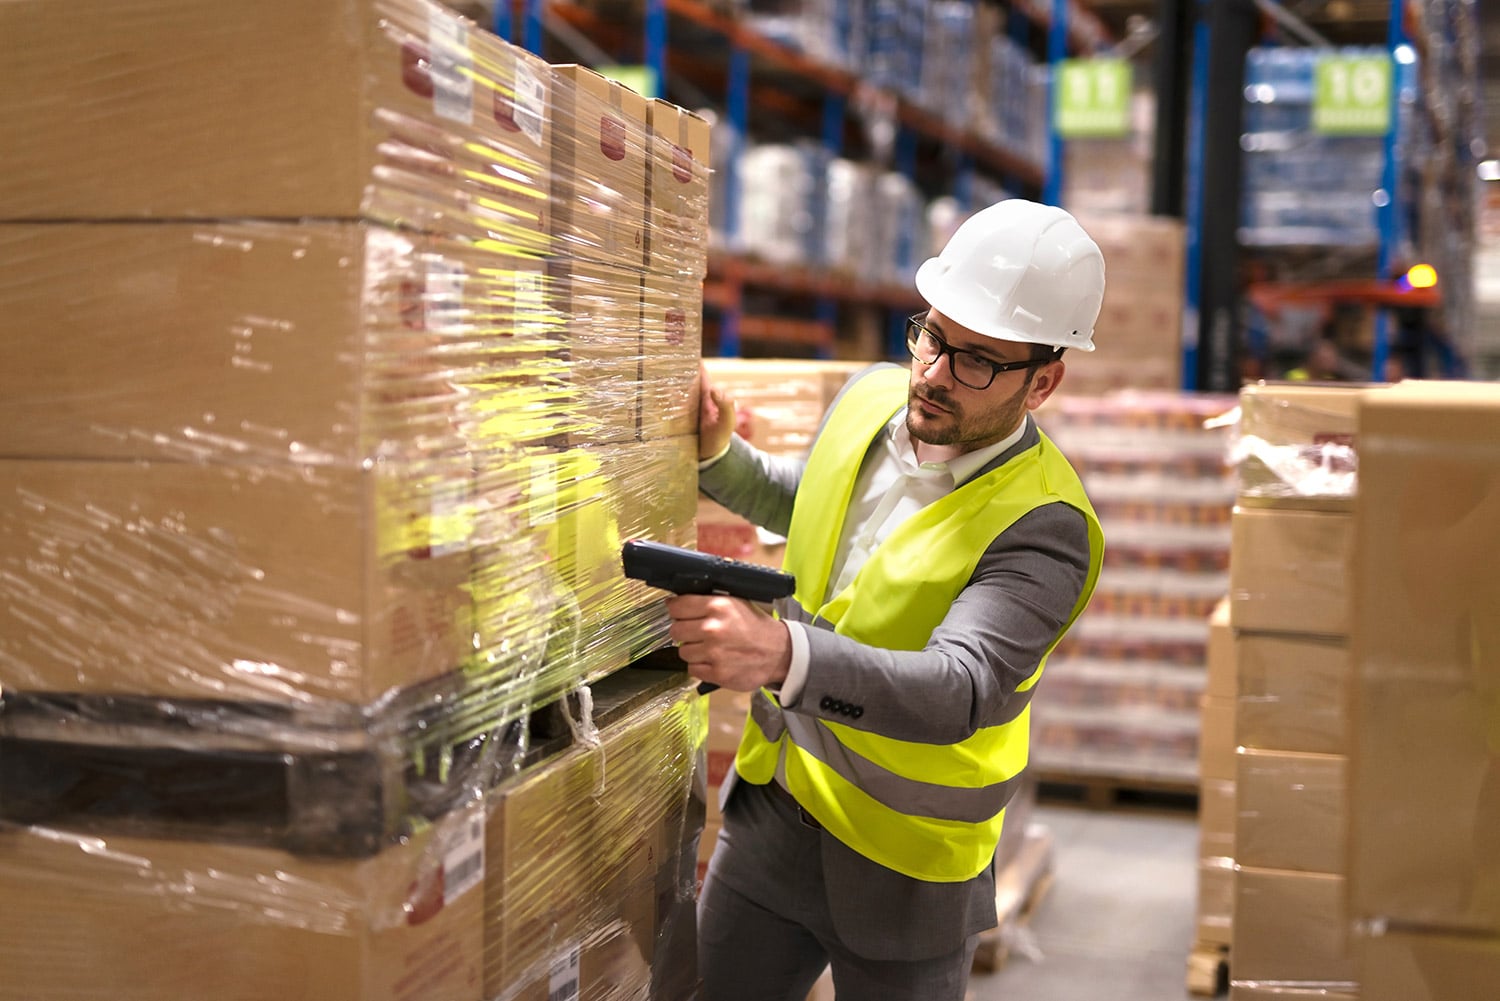 Man in warehouse scanning packages with vest and hard hat